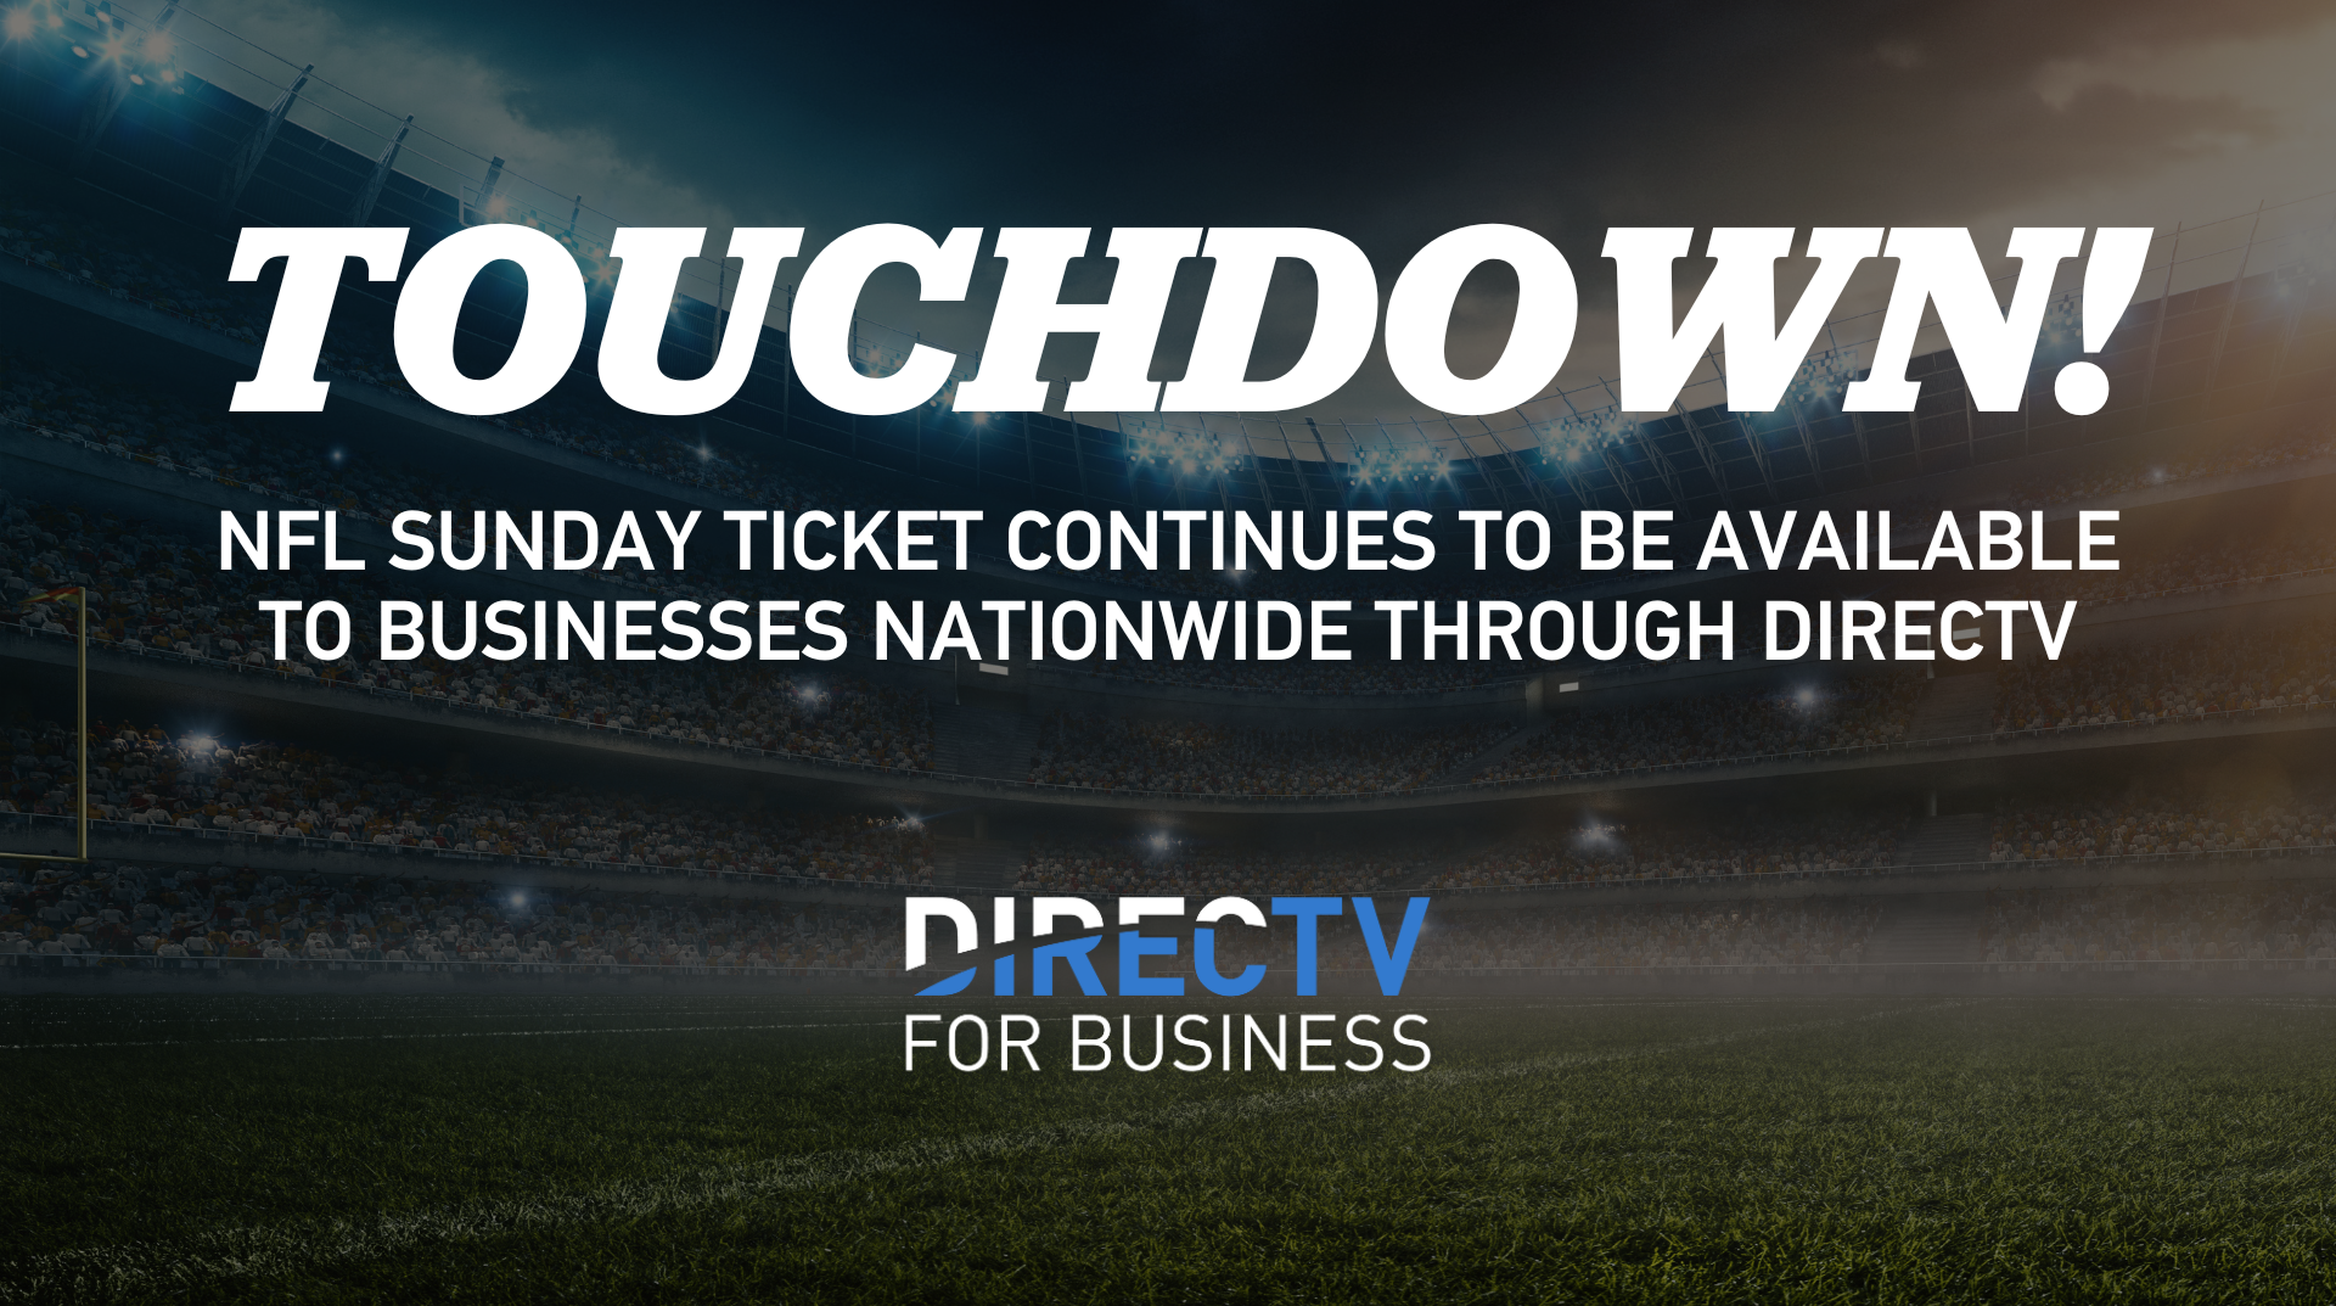 DirecTV to Sell NFL Sunday Ticket to Commercial Establishments